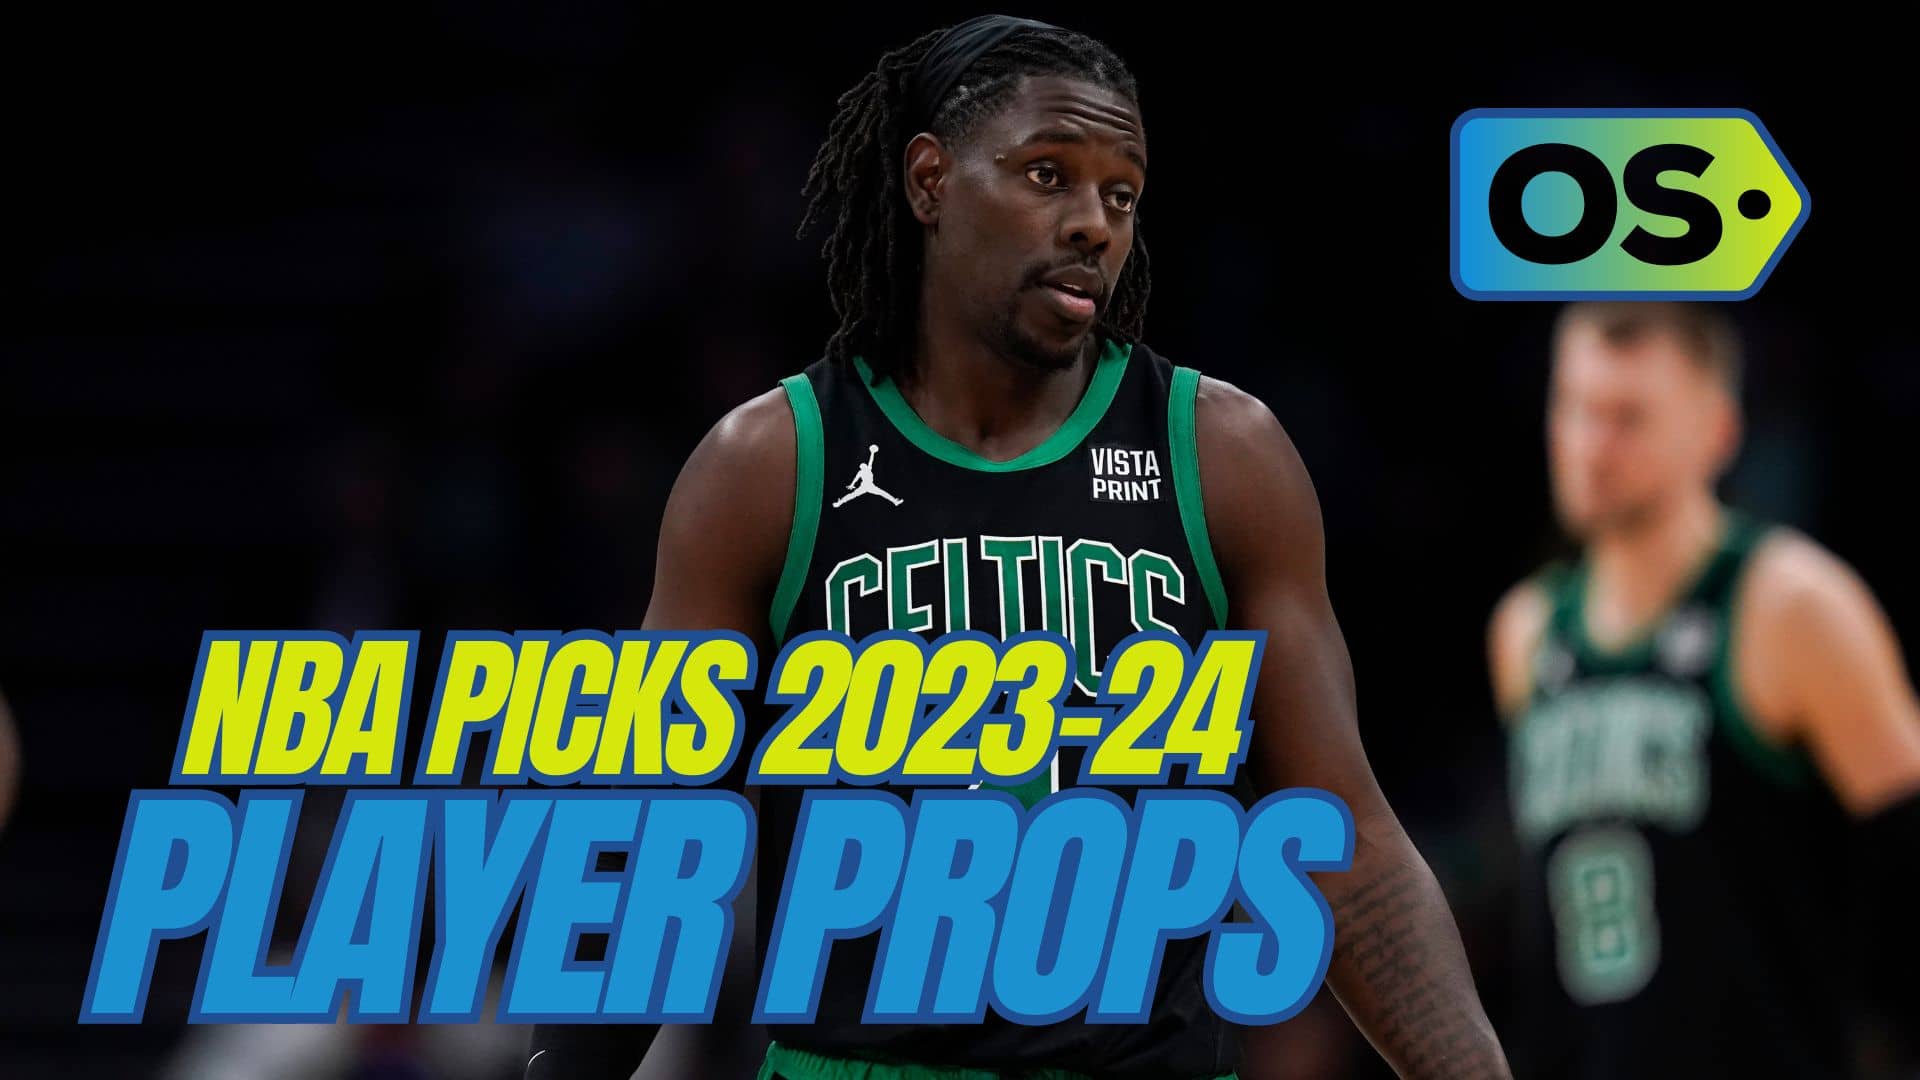 The best NBA player prop bets and picks today for Tuesday, December 12, include wagers on Jrue Holiday and DeMar DeRozan.